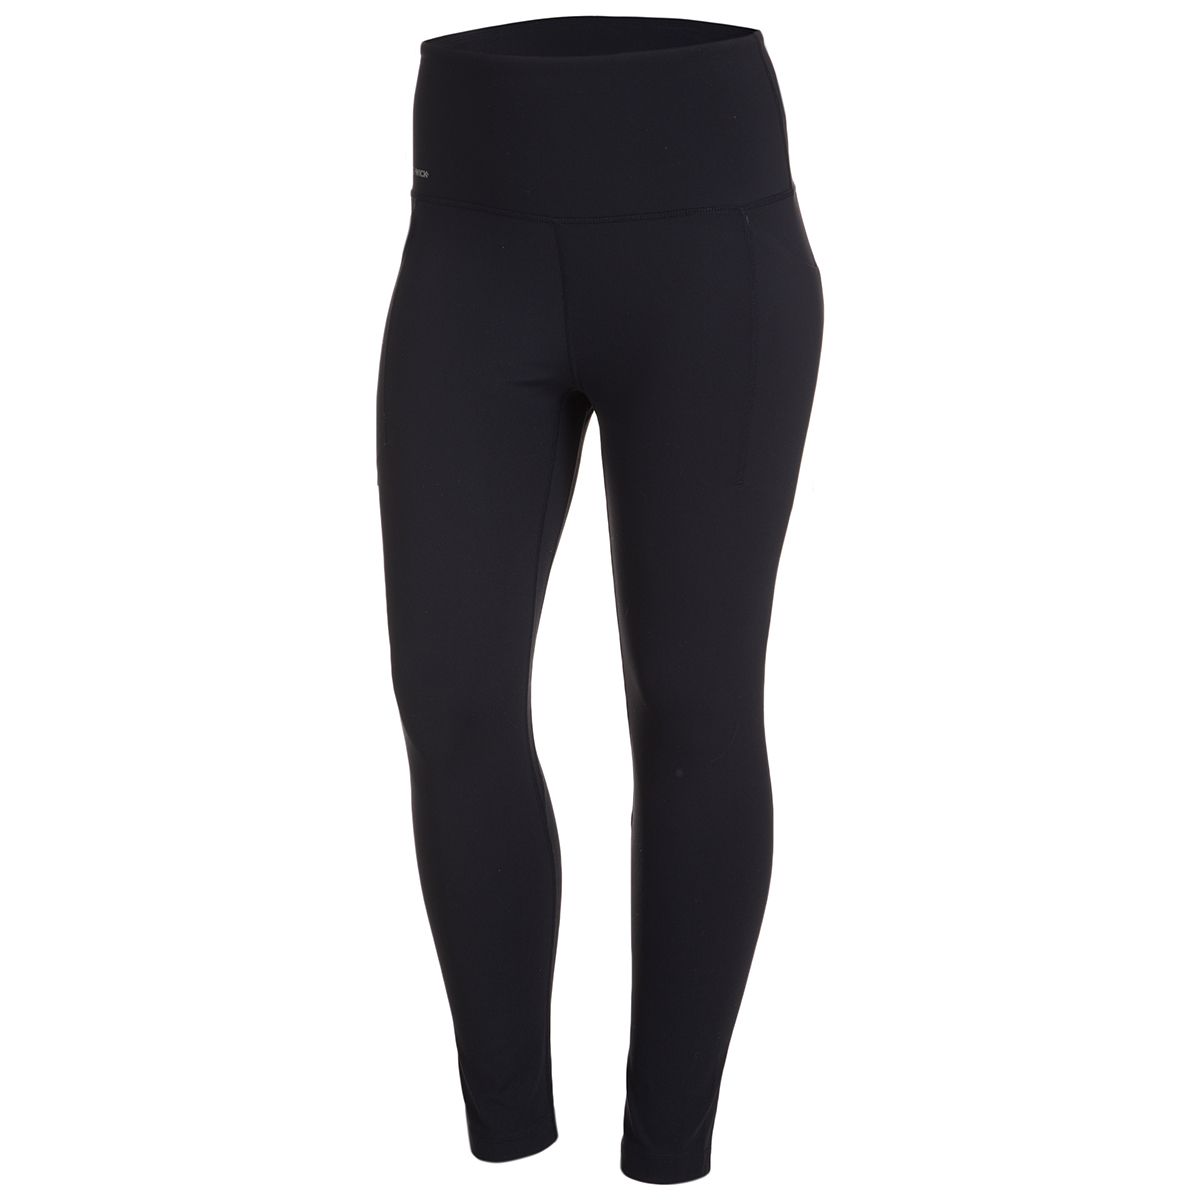 THE NORTH FACE Women’s Dune Sky Pocket Tights